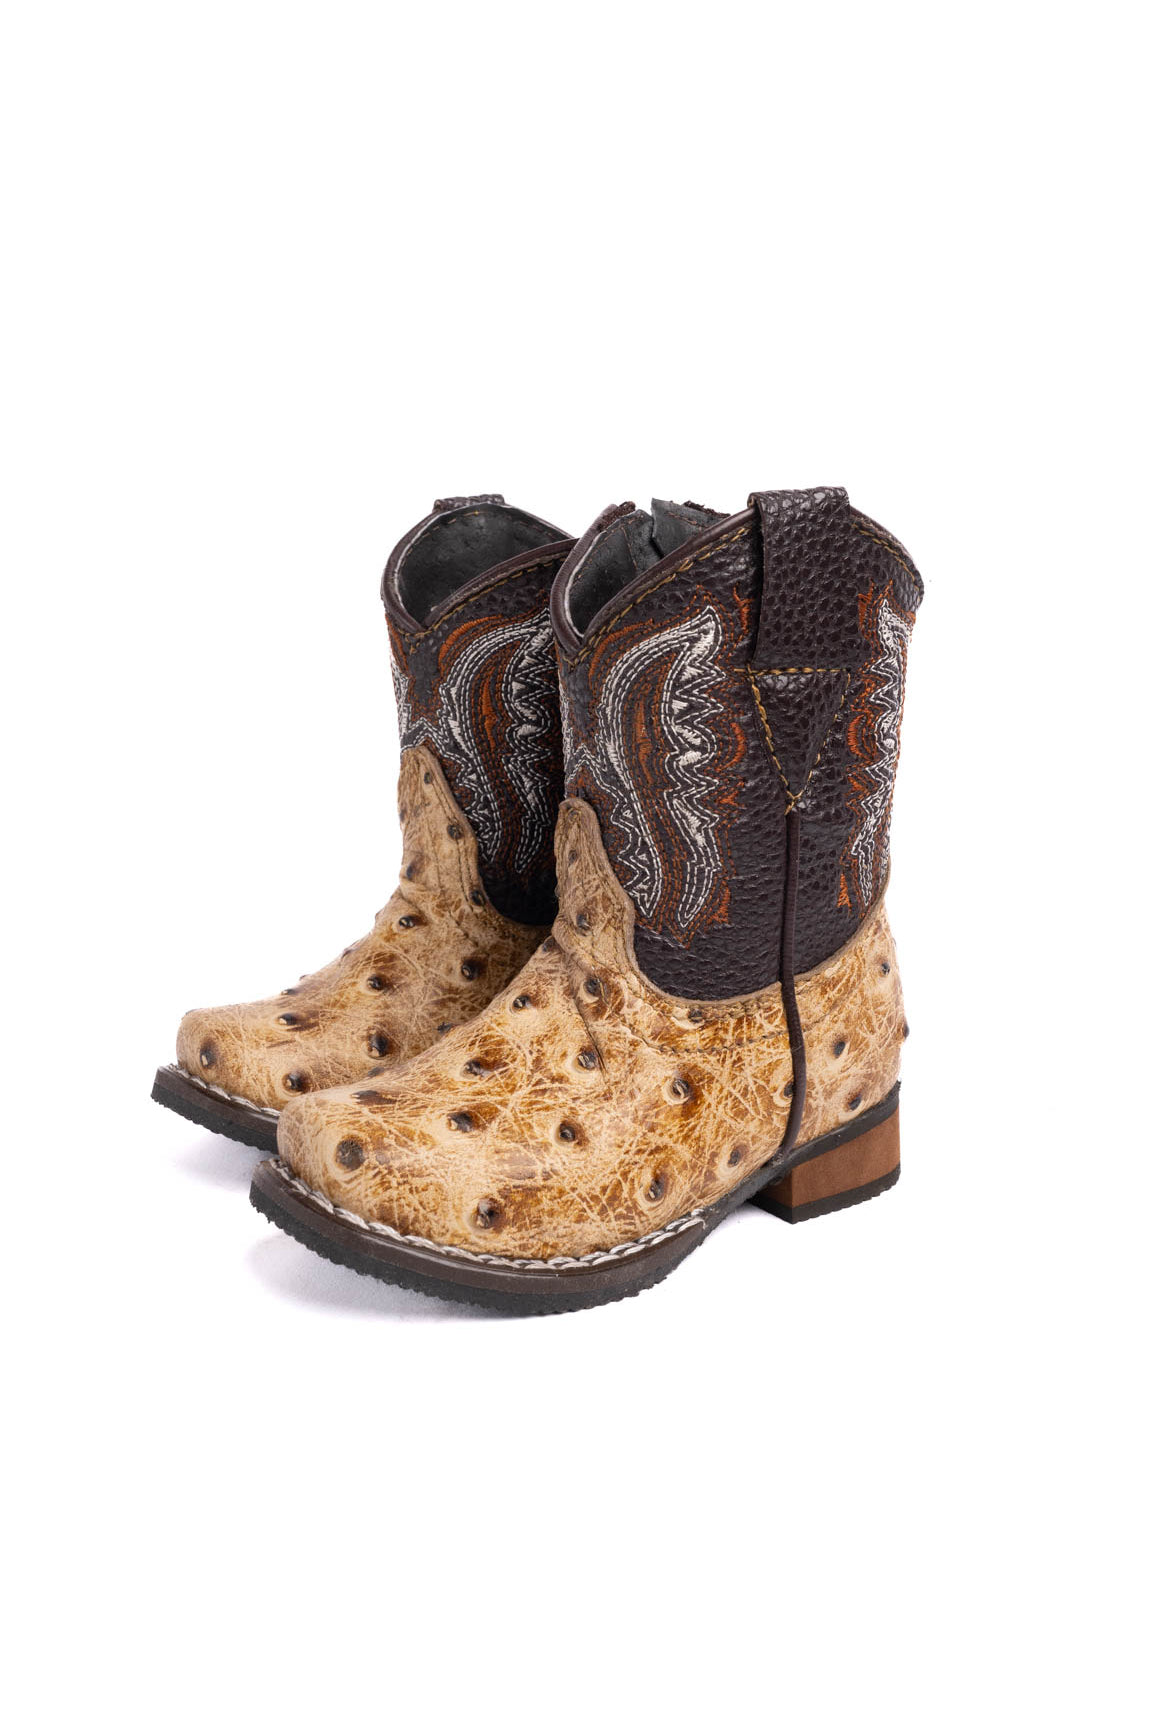 Baby Rodeo Ostrich Cowboy Boots